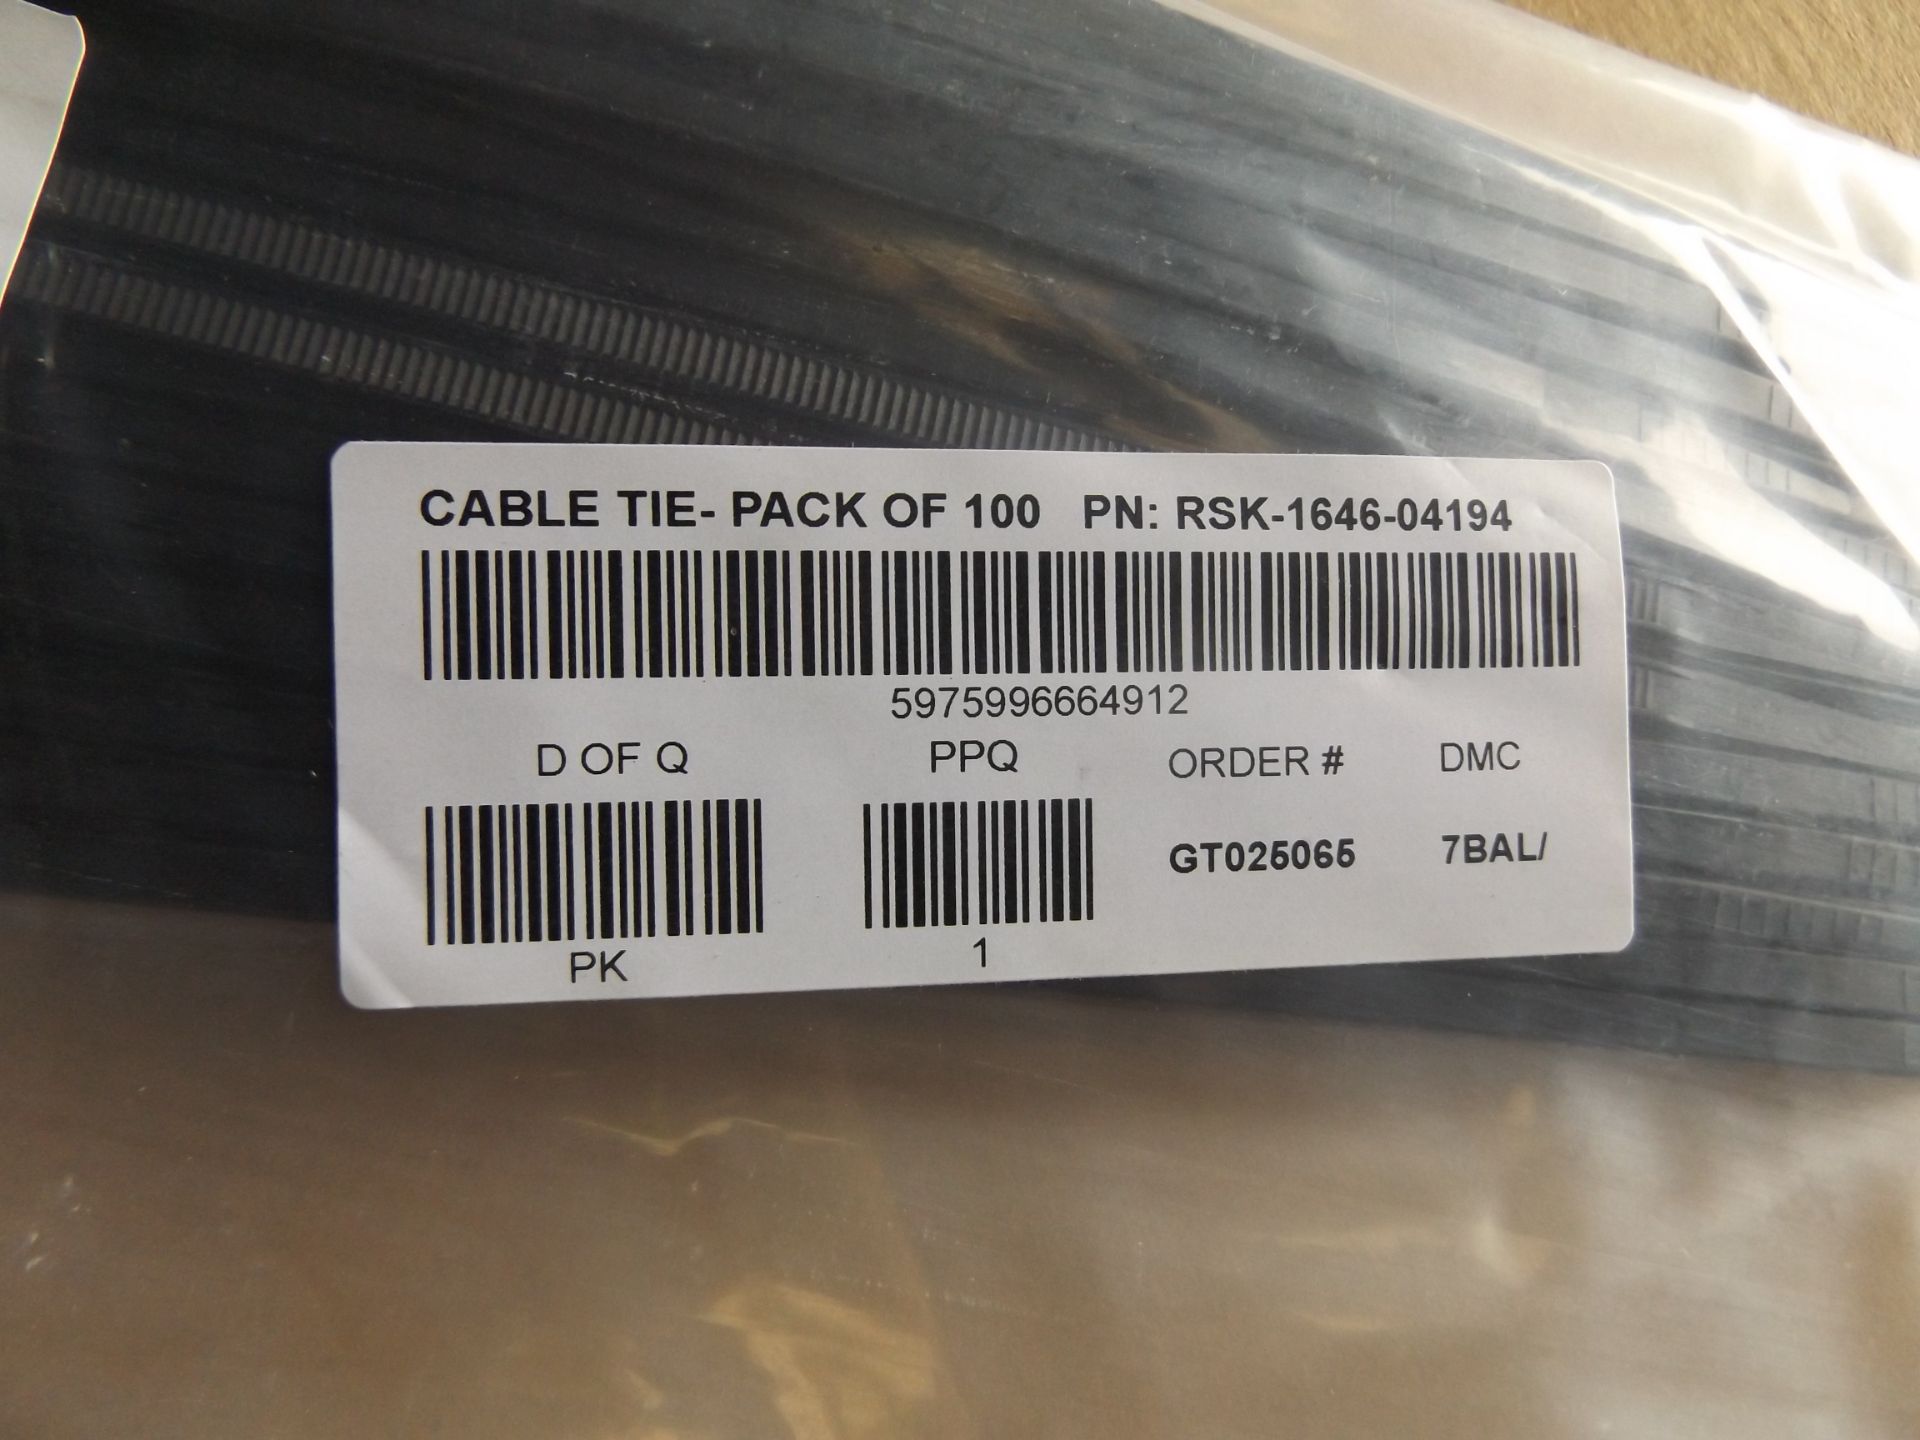 10,000 x 368x4.8mm Cable Ties P/No RSK-1646-04194 - Image 5 of 5